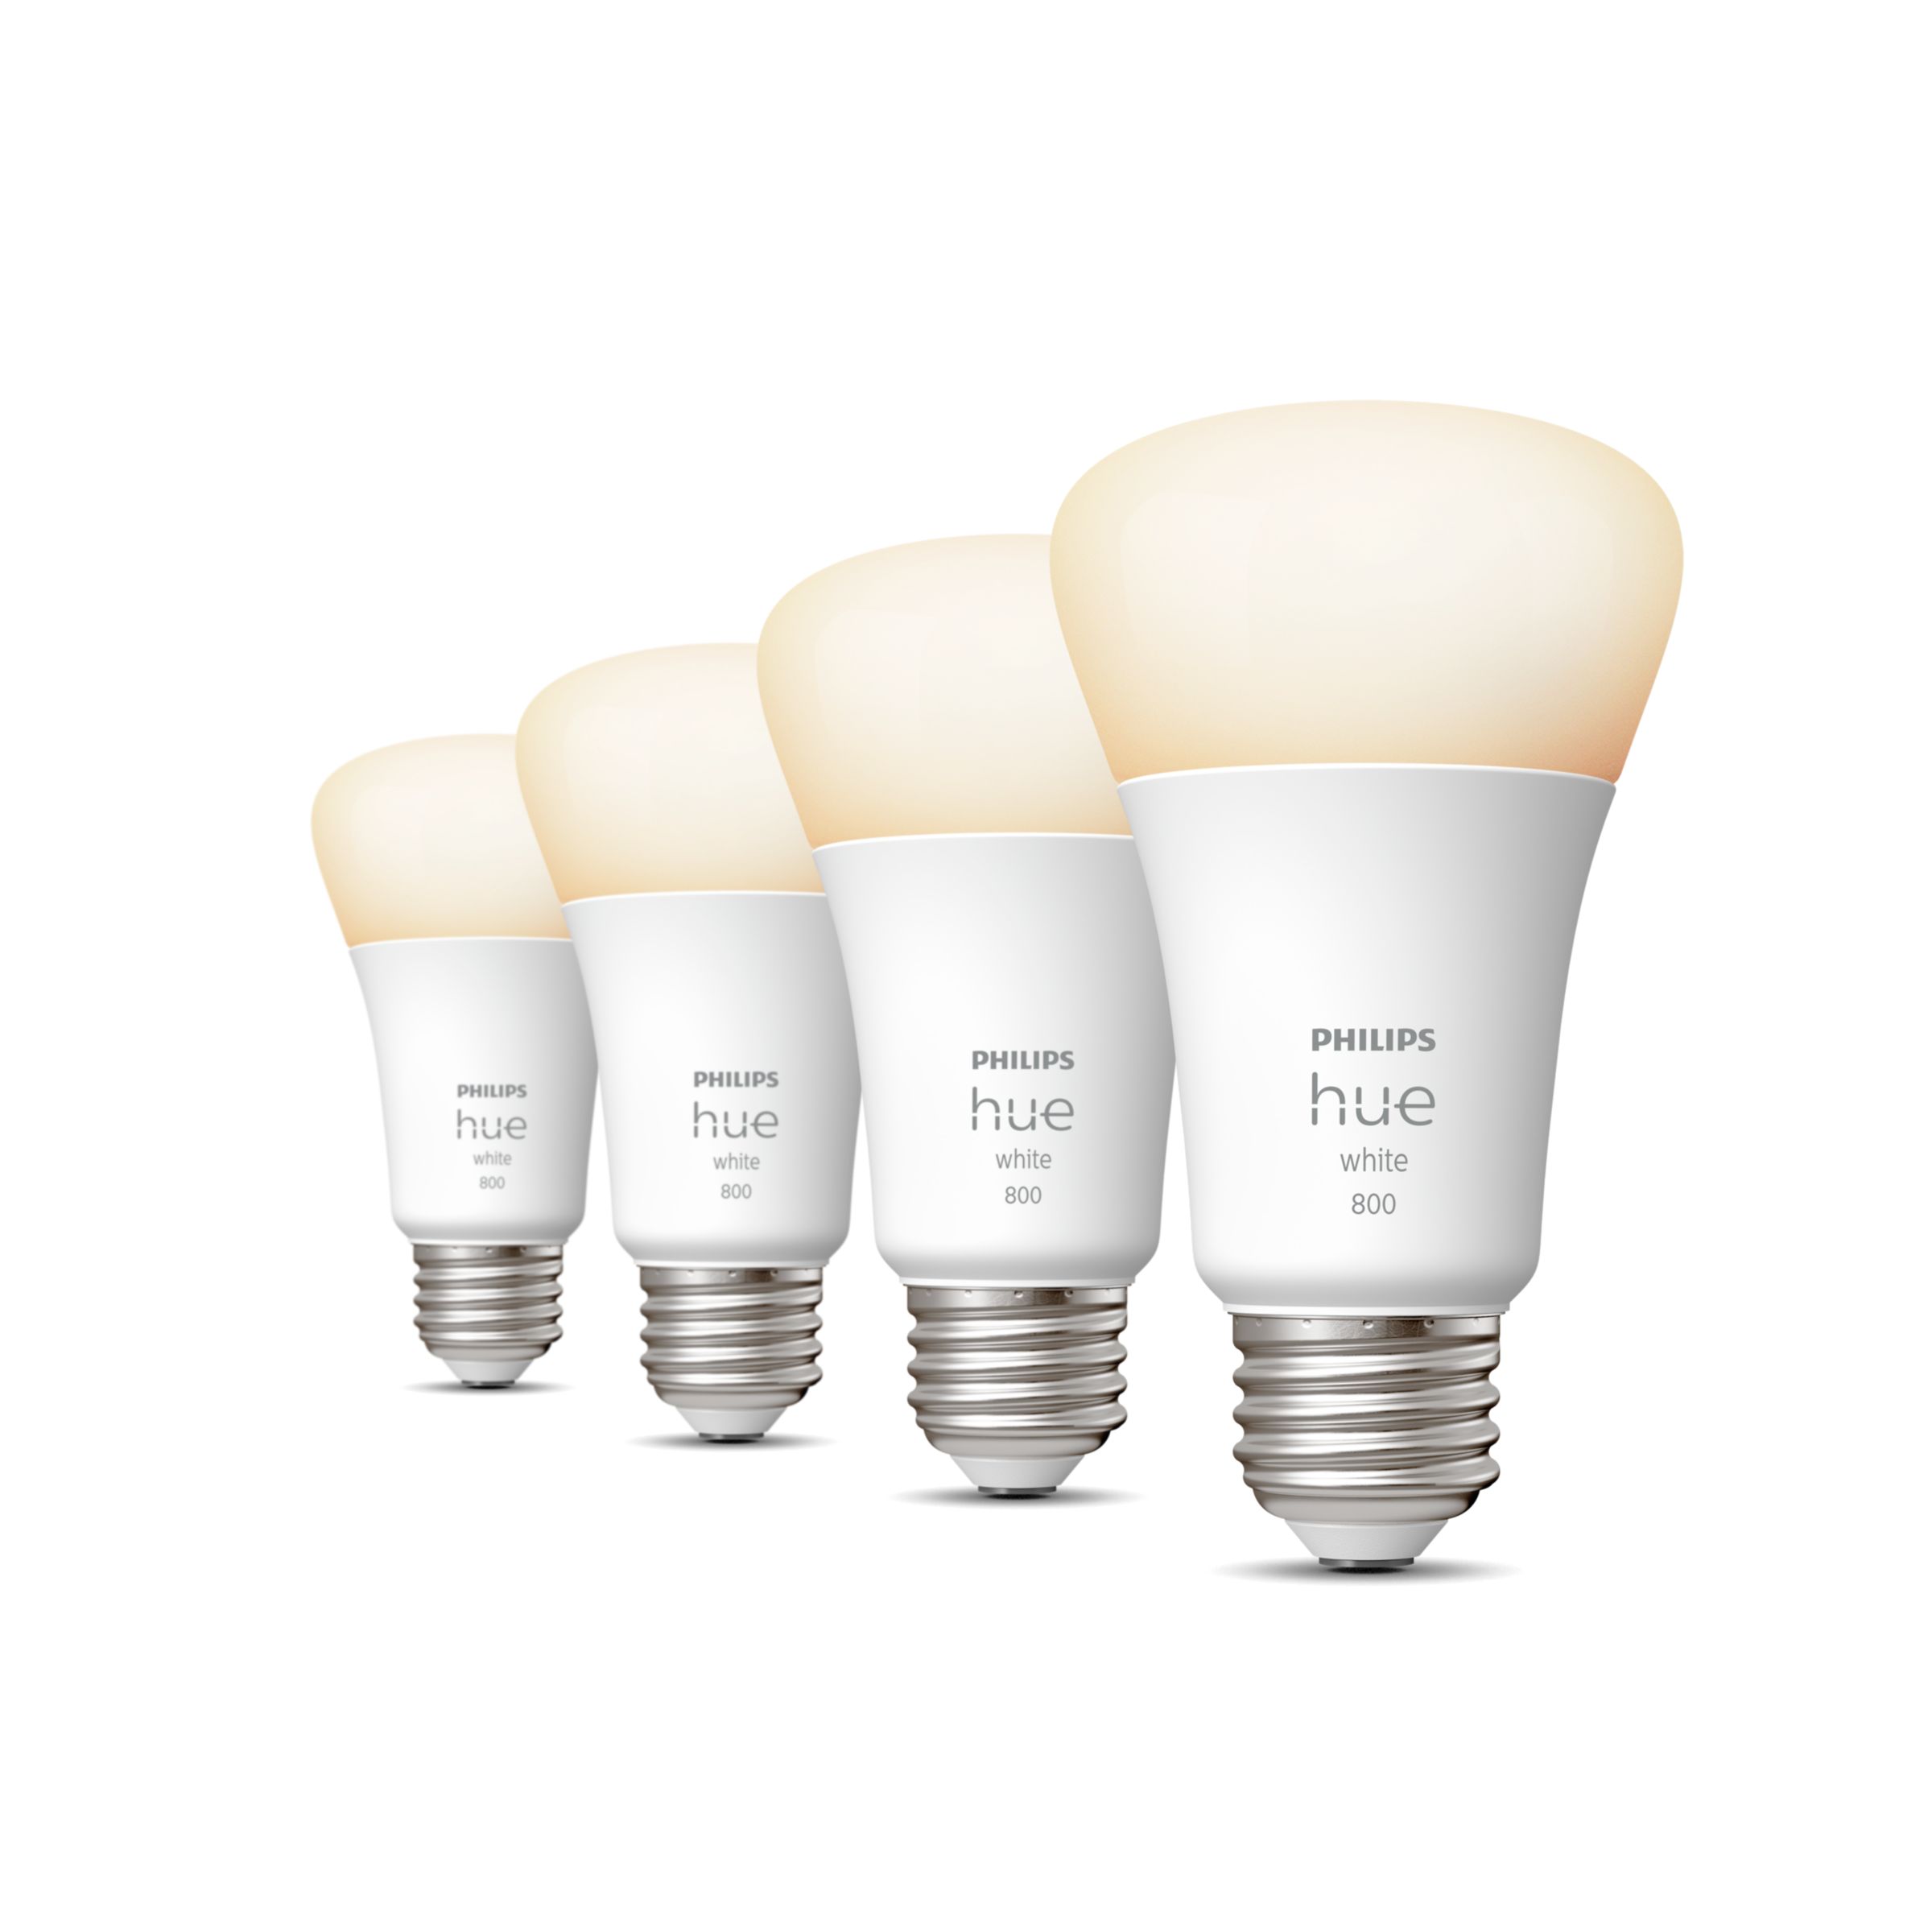 reign Moral education journalist Hue White A19 - E26 smart bulb - 60 W (4-pack) | Philips Hue US